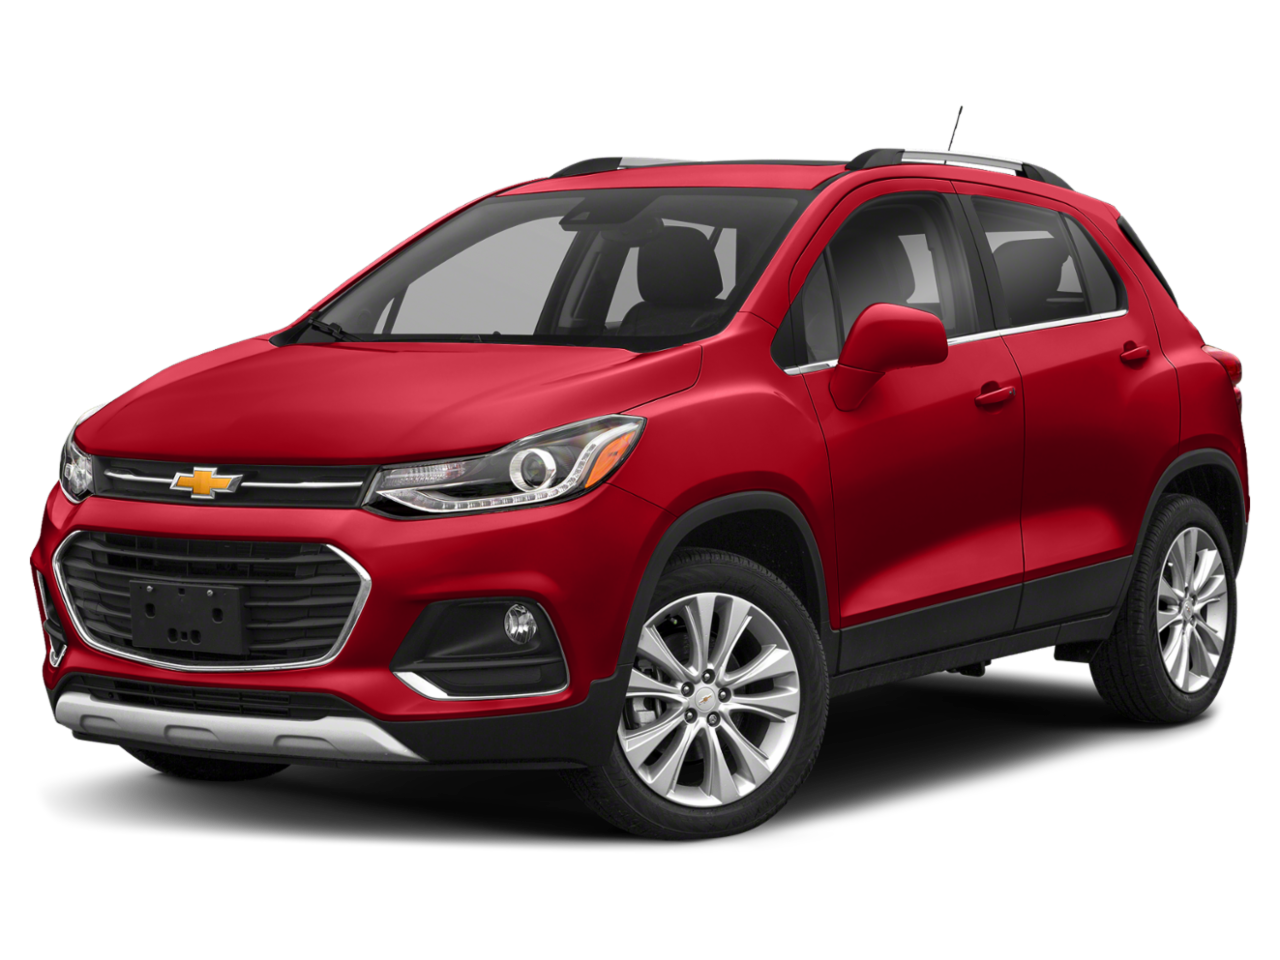 2020 Chevrolet Trax Colors, Pictures & Packages Bryner